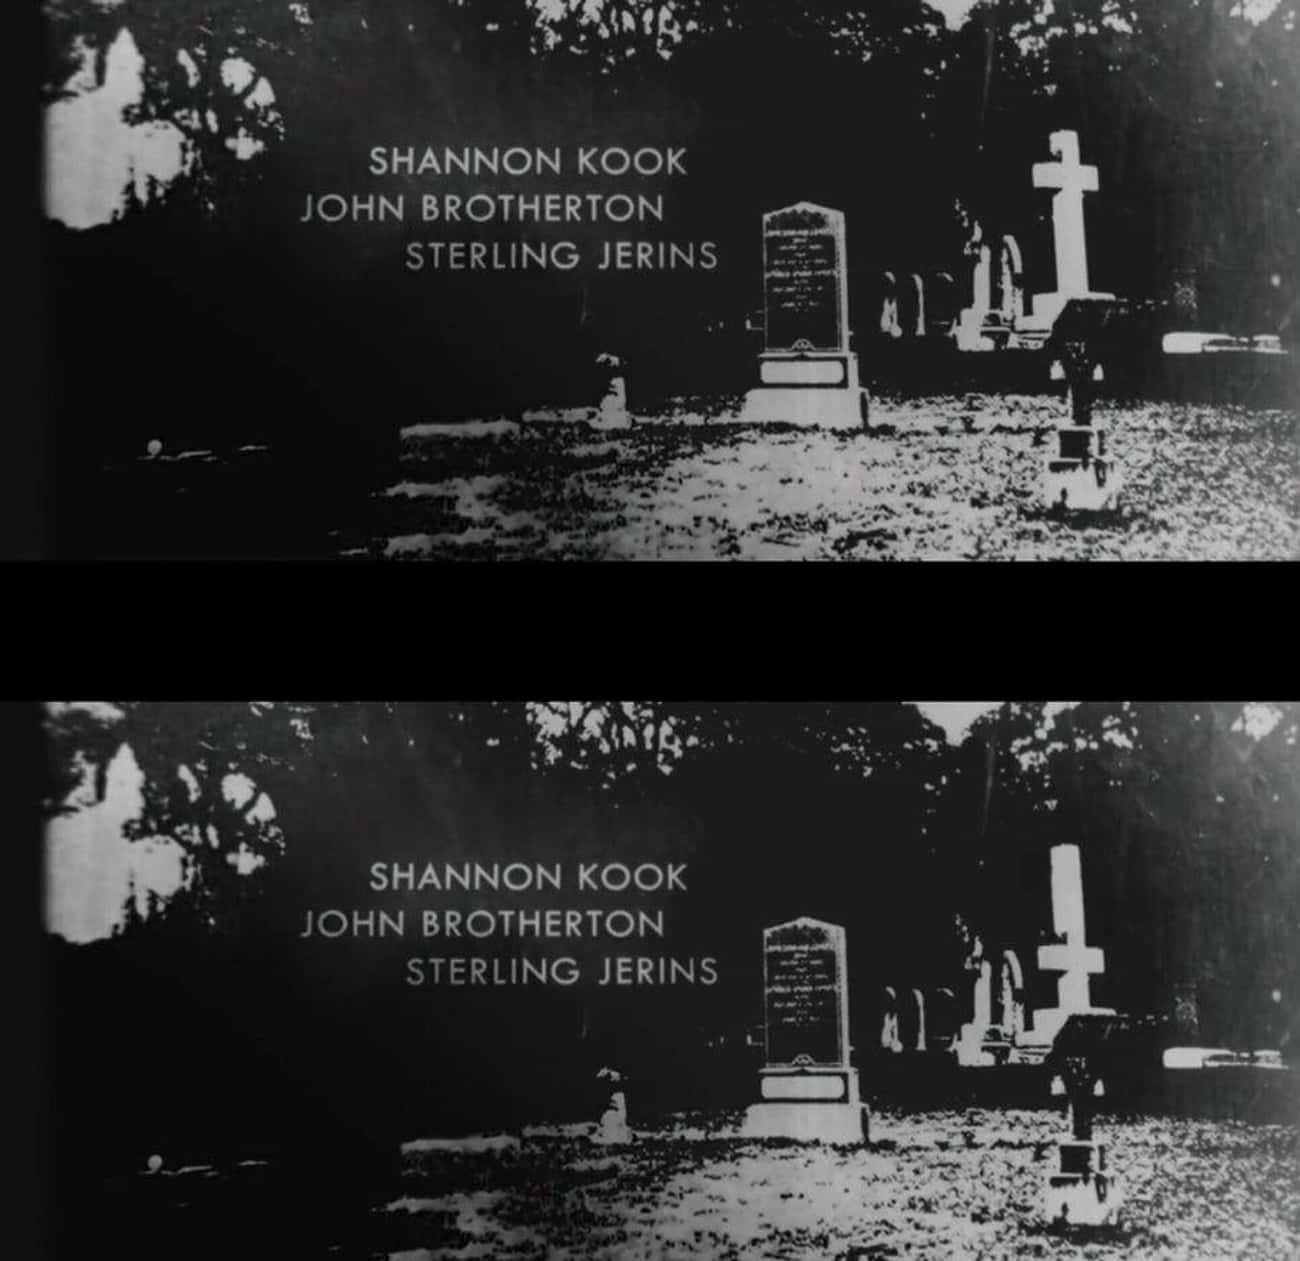 Even The Credits Are Spooky